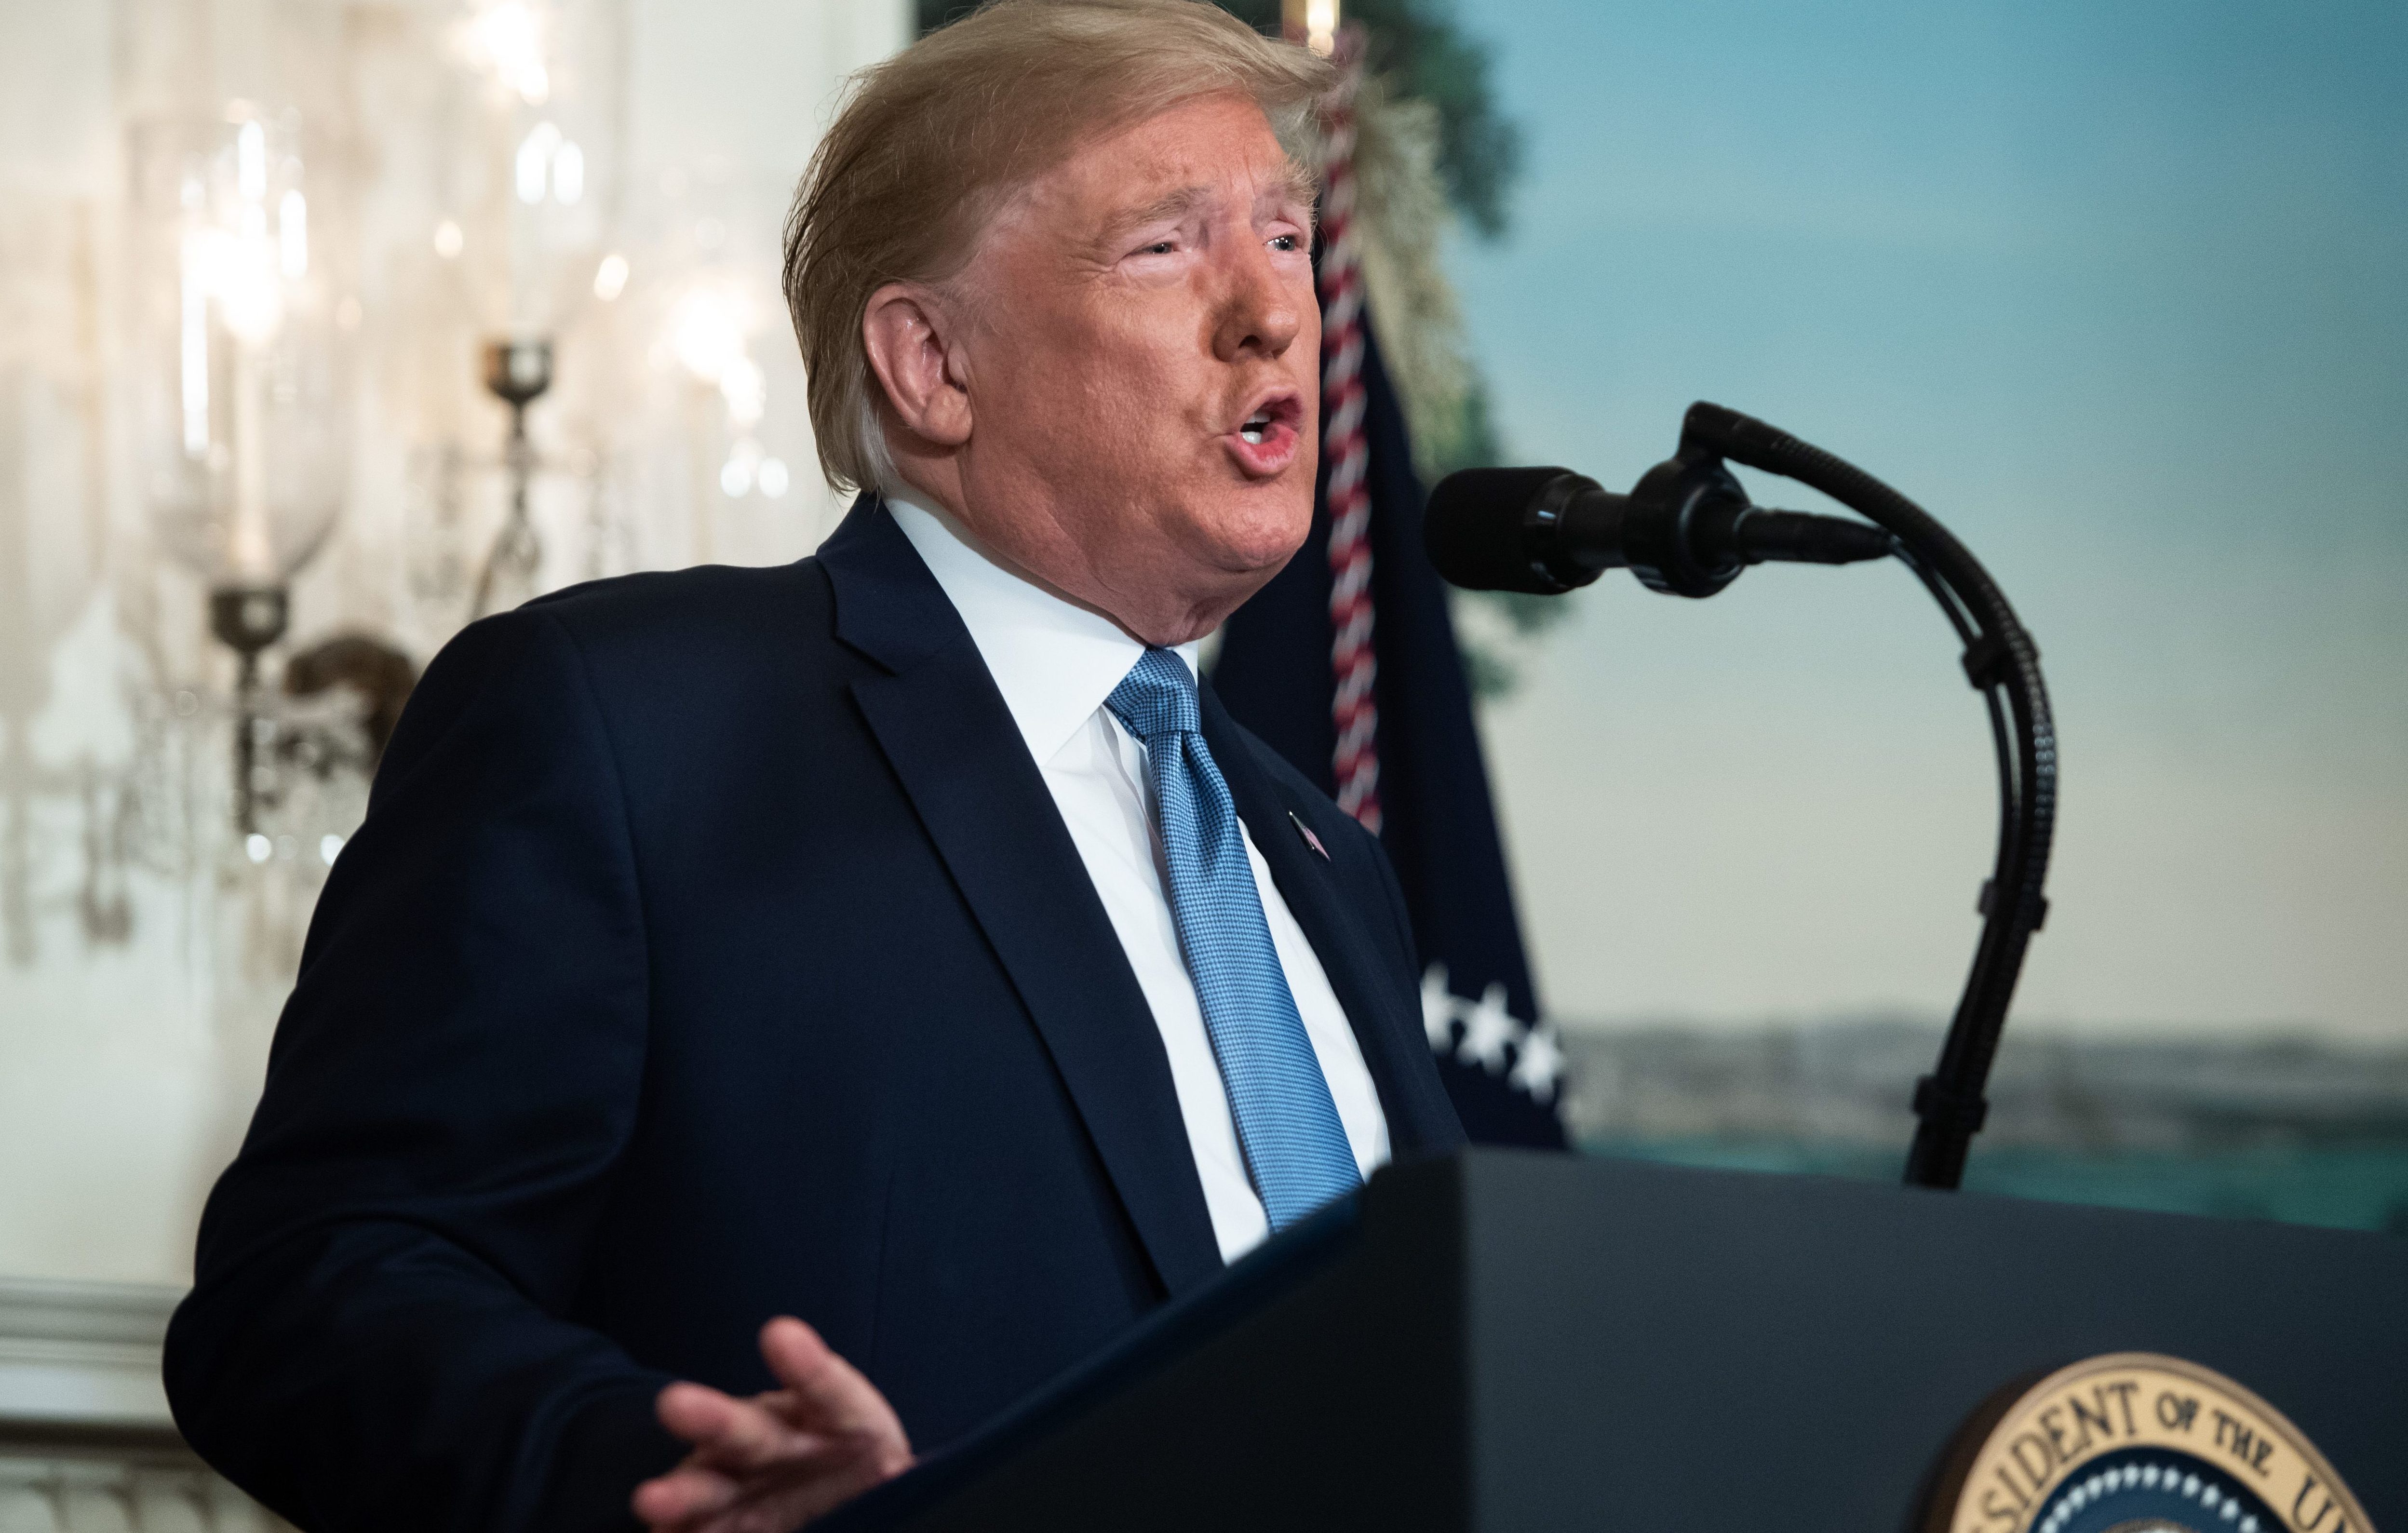 US President Donald Trump speaks about the mass shootings from the Diplomatic Reception Room of the White House in Washington, DC, August 5, 2019. (SAUL LOEB/AFP/Getty Images)